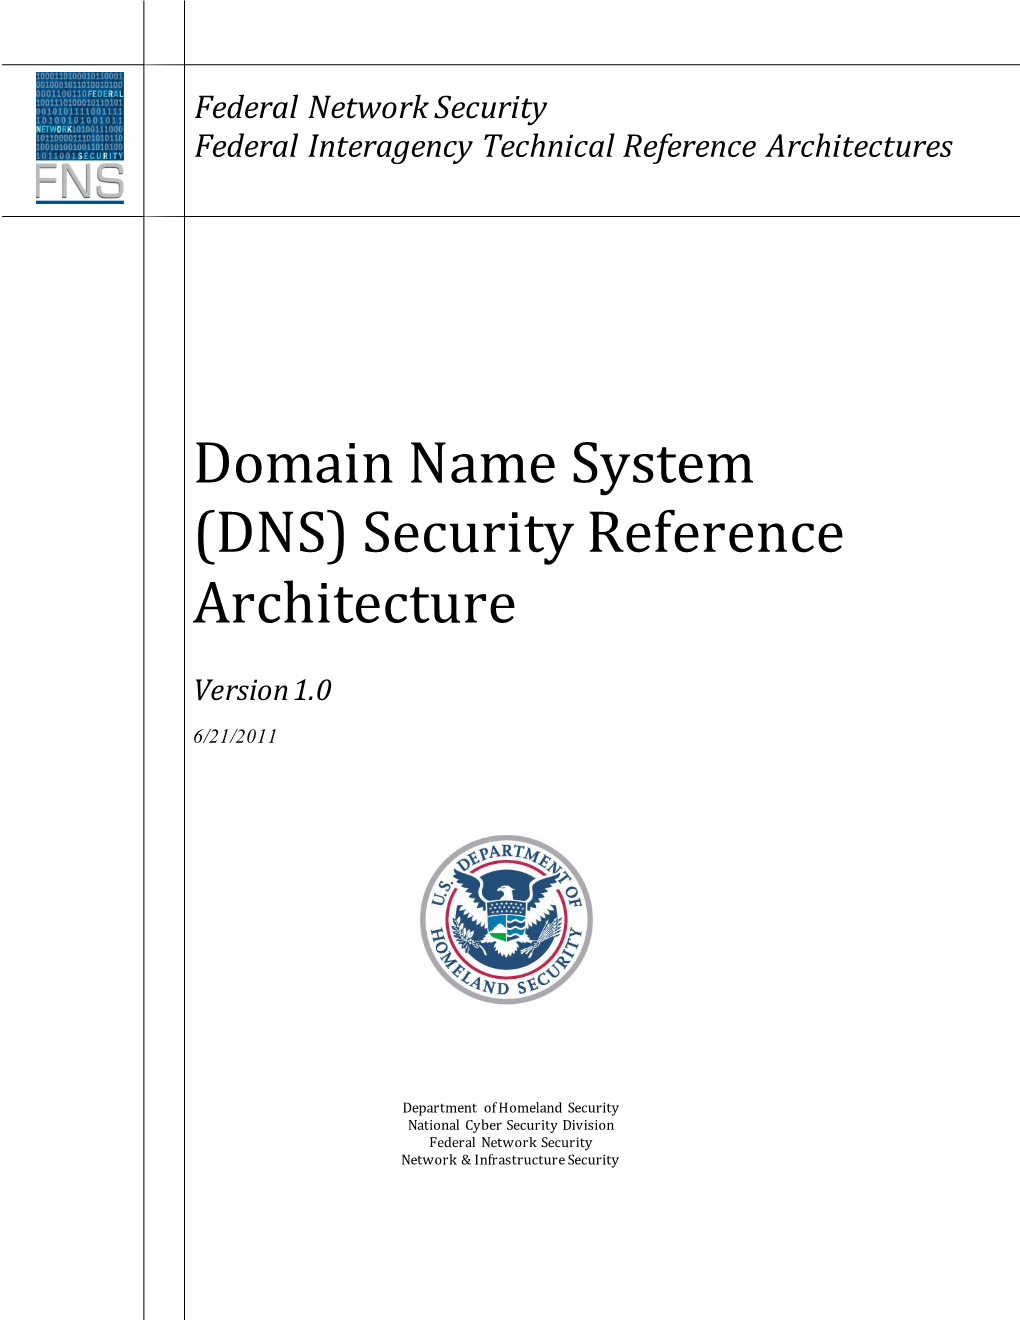 Domain Name System (DNS) Security Reference Architecture